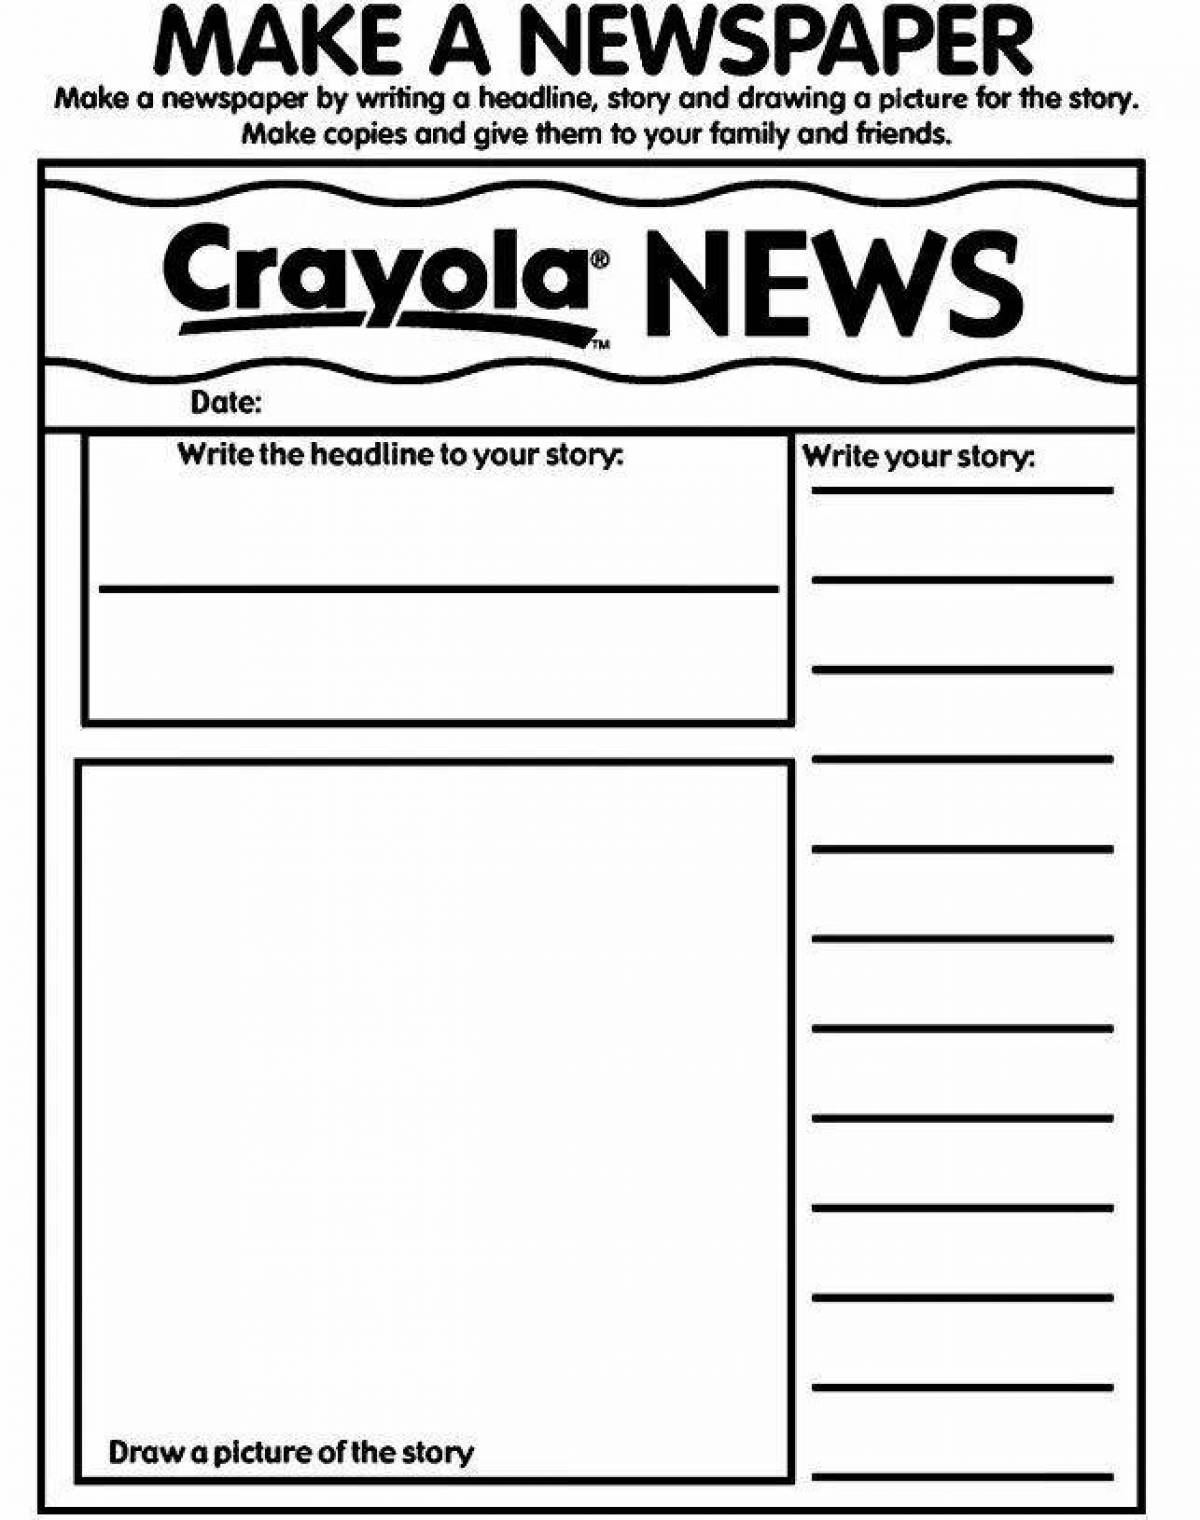 Newspaper color-explosion coloring page